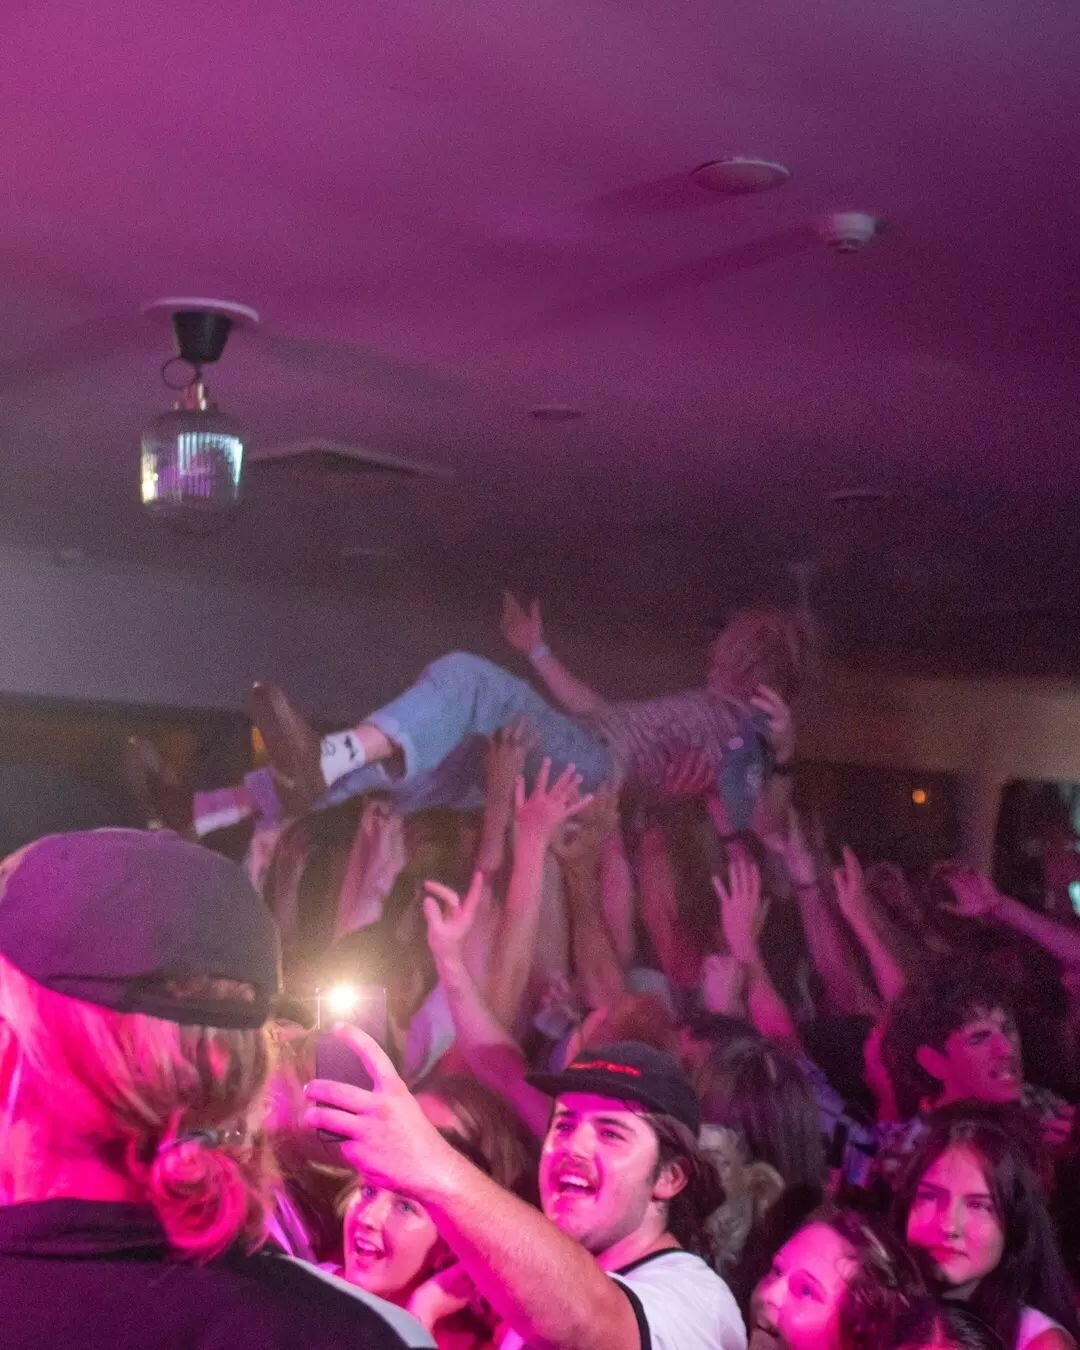 🕺&nbsp; Will you be the Master of the Mosh?! We will be on the lookout at Broken Open events for the most enthusiastic crowd member to win tickets to future events!

Tag a mate who is always gettin' down on the dance floor 👇

📸&nbsp;@theterrysband